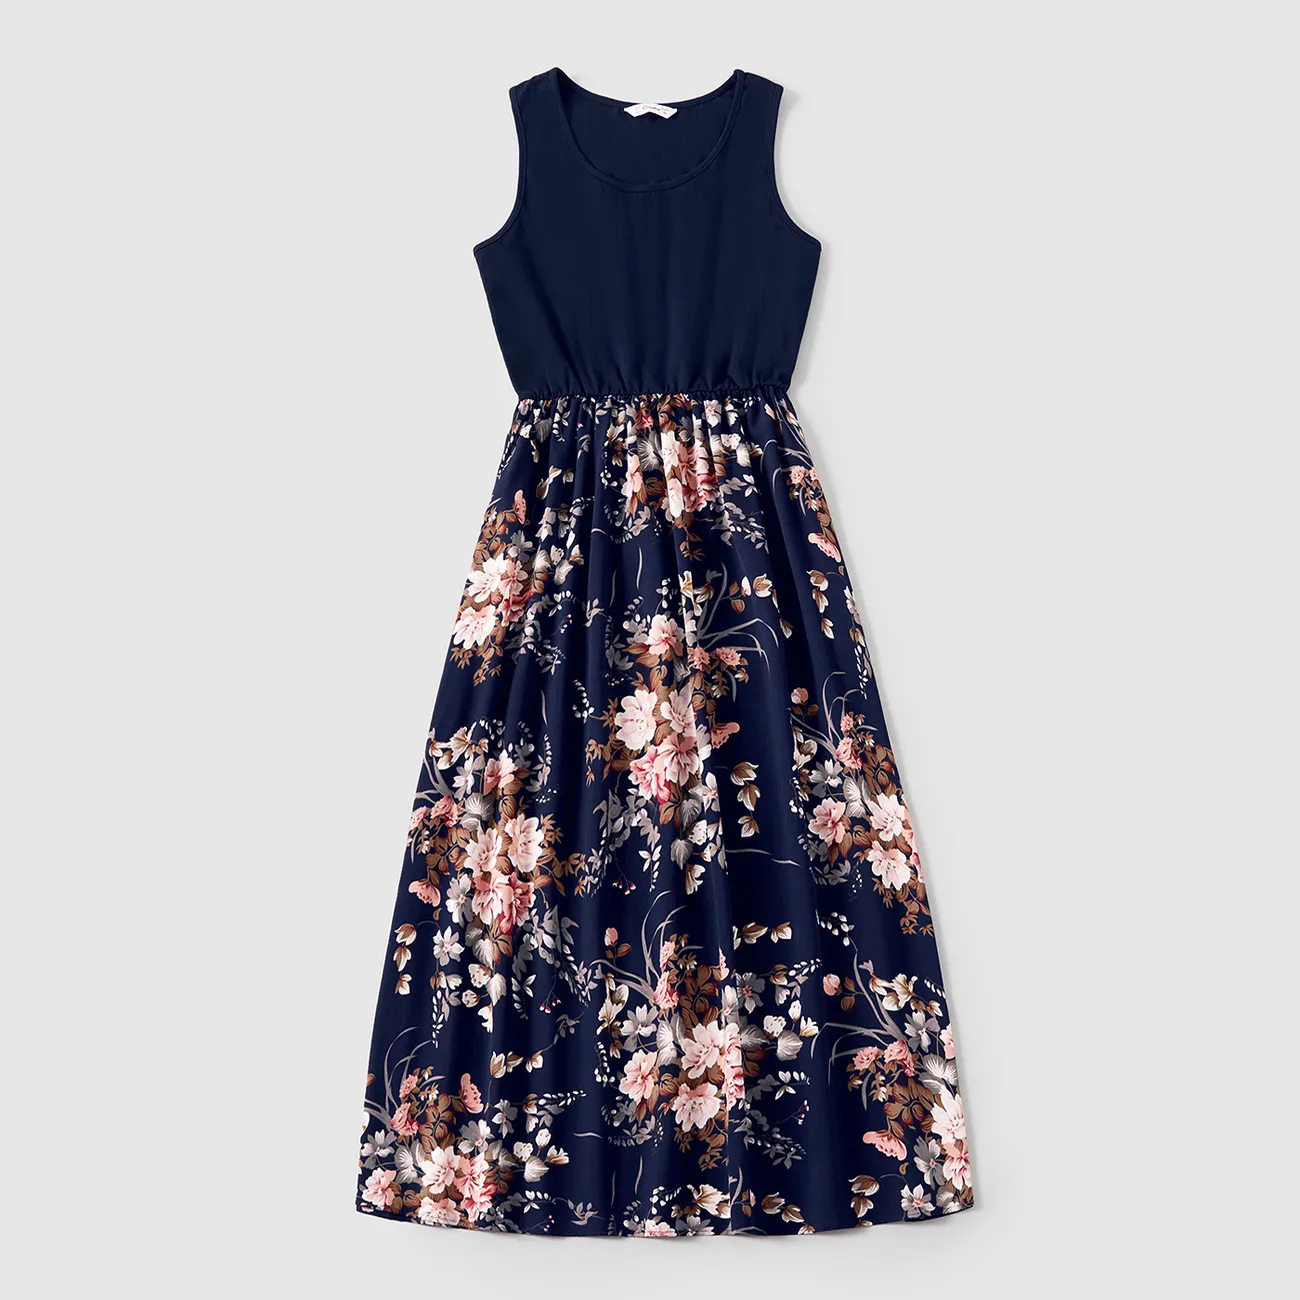 Family Matching Sleeveless Floral Print Spliced Midi Dresses and Short-sleeve Striped T-shirts Sets Blue big image 1